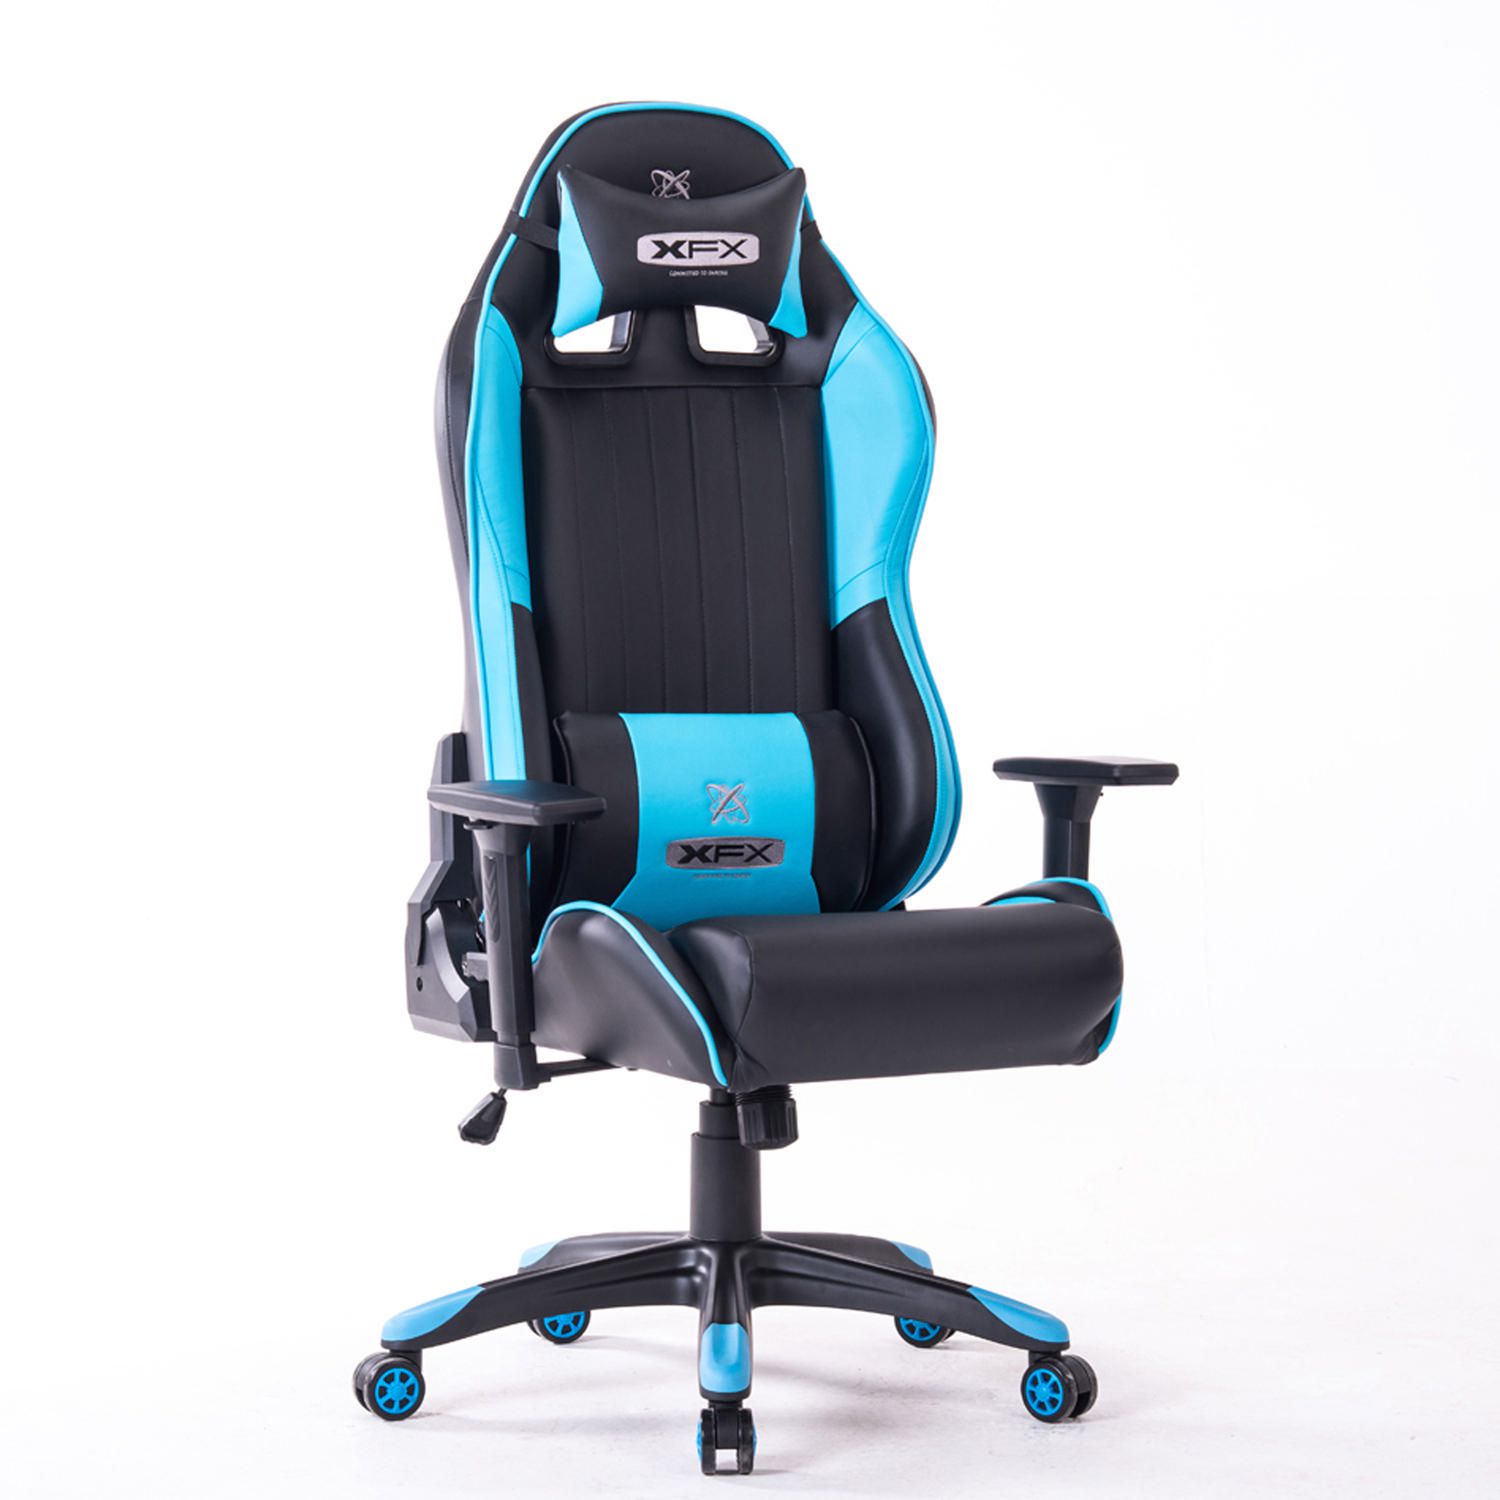 Creatice Gaming Chairs Cheap Canada with Simple Decor